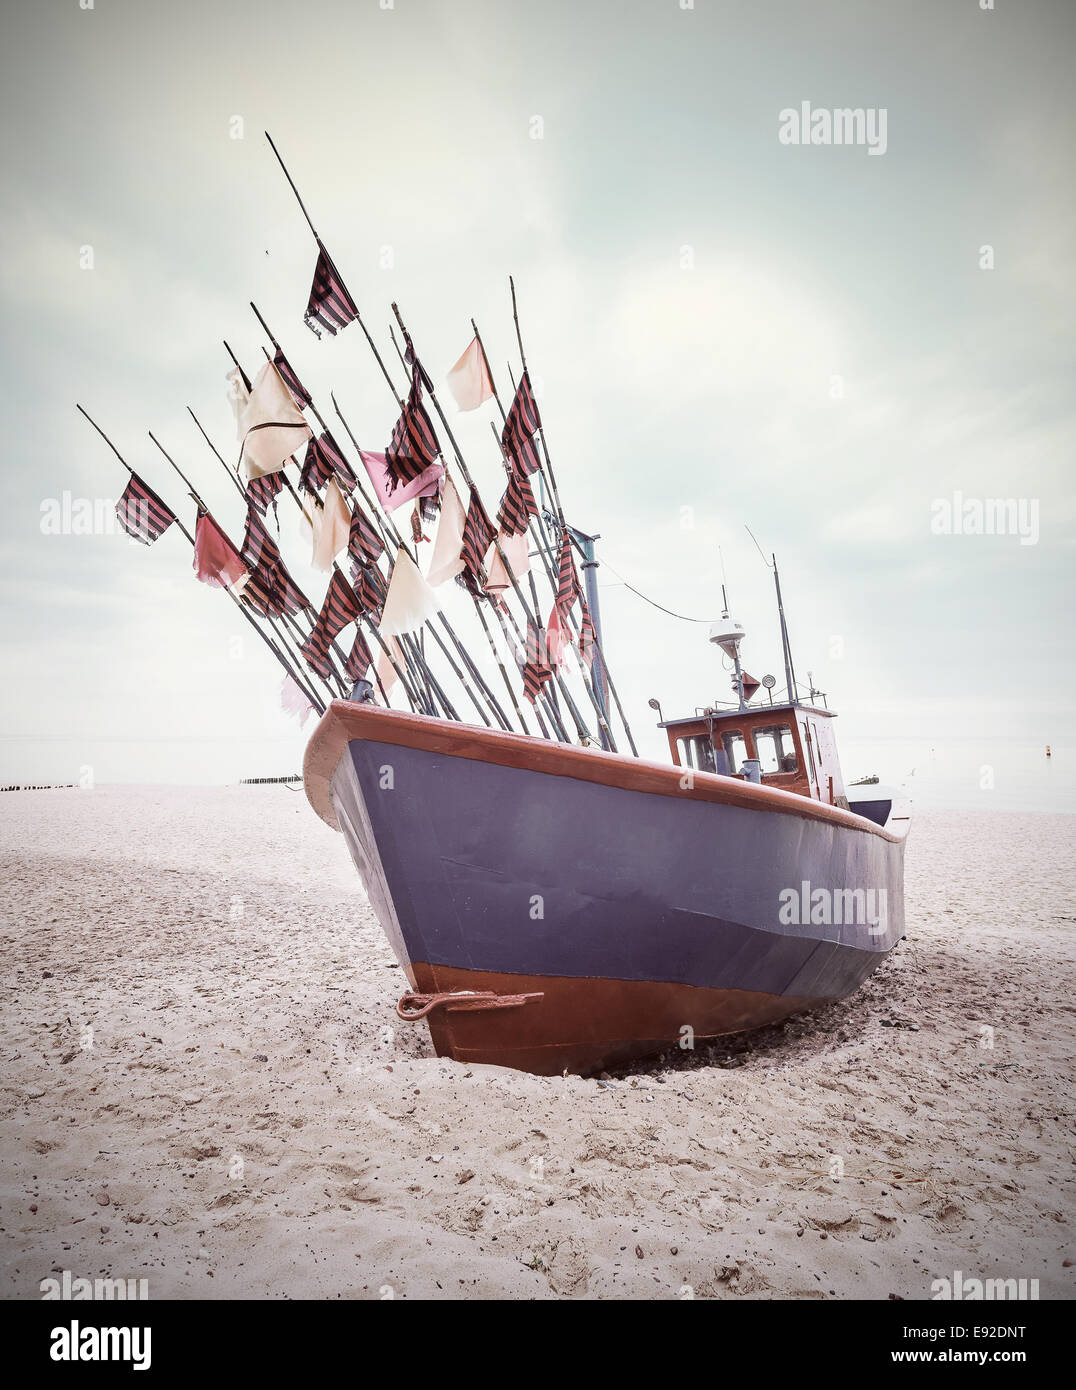 Small fishing boat on shore of the Baltic Sea, vintage retro style. Stock Photo